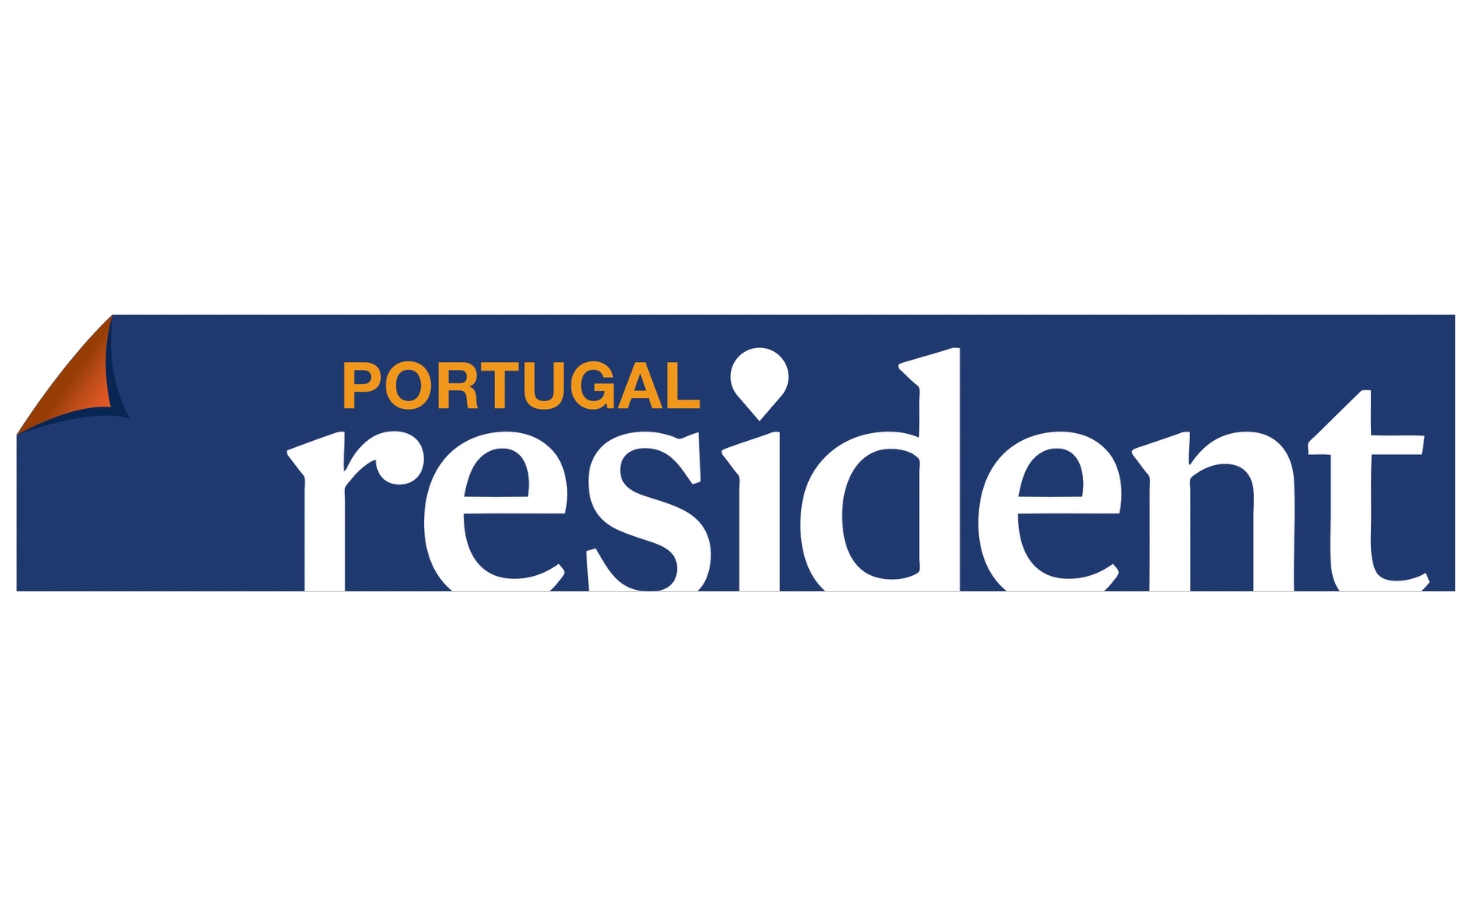 Portugal Resident LOGO colored copy